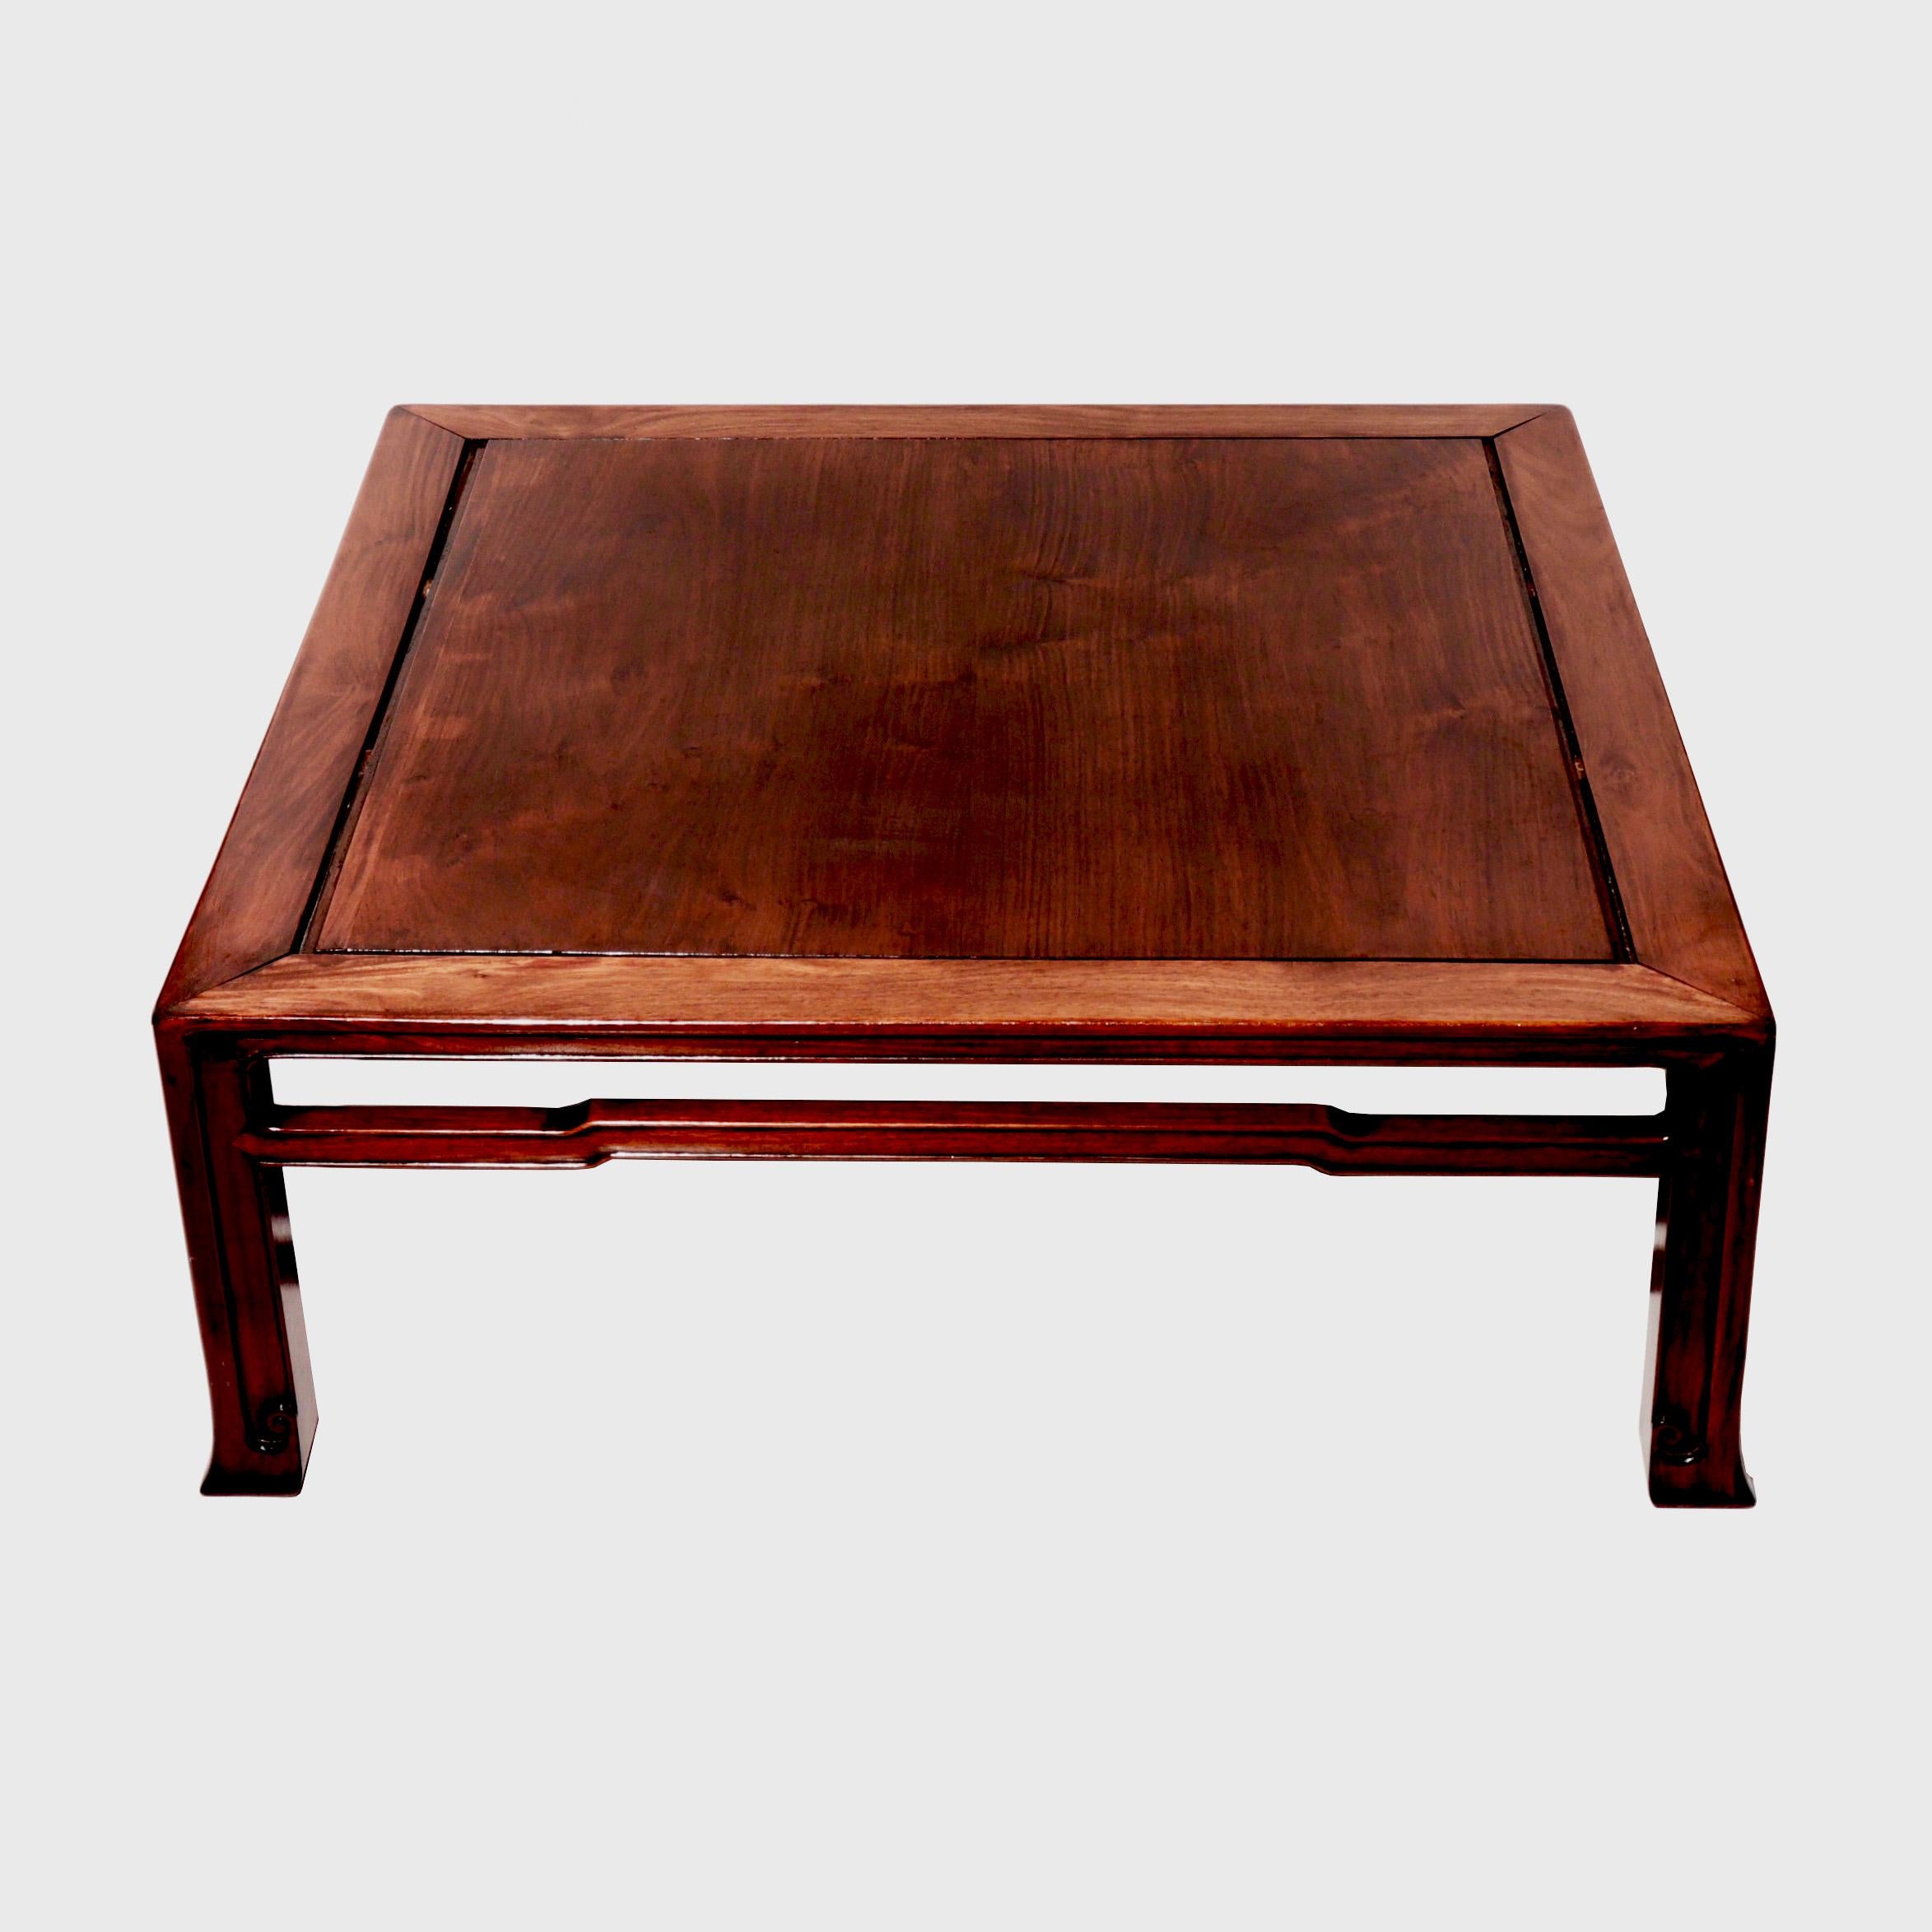 Japanese Rosewood Square Tea Table For Sale 1